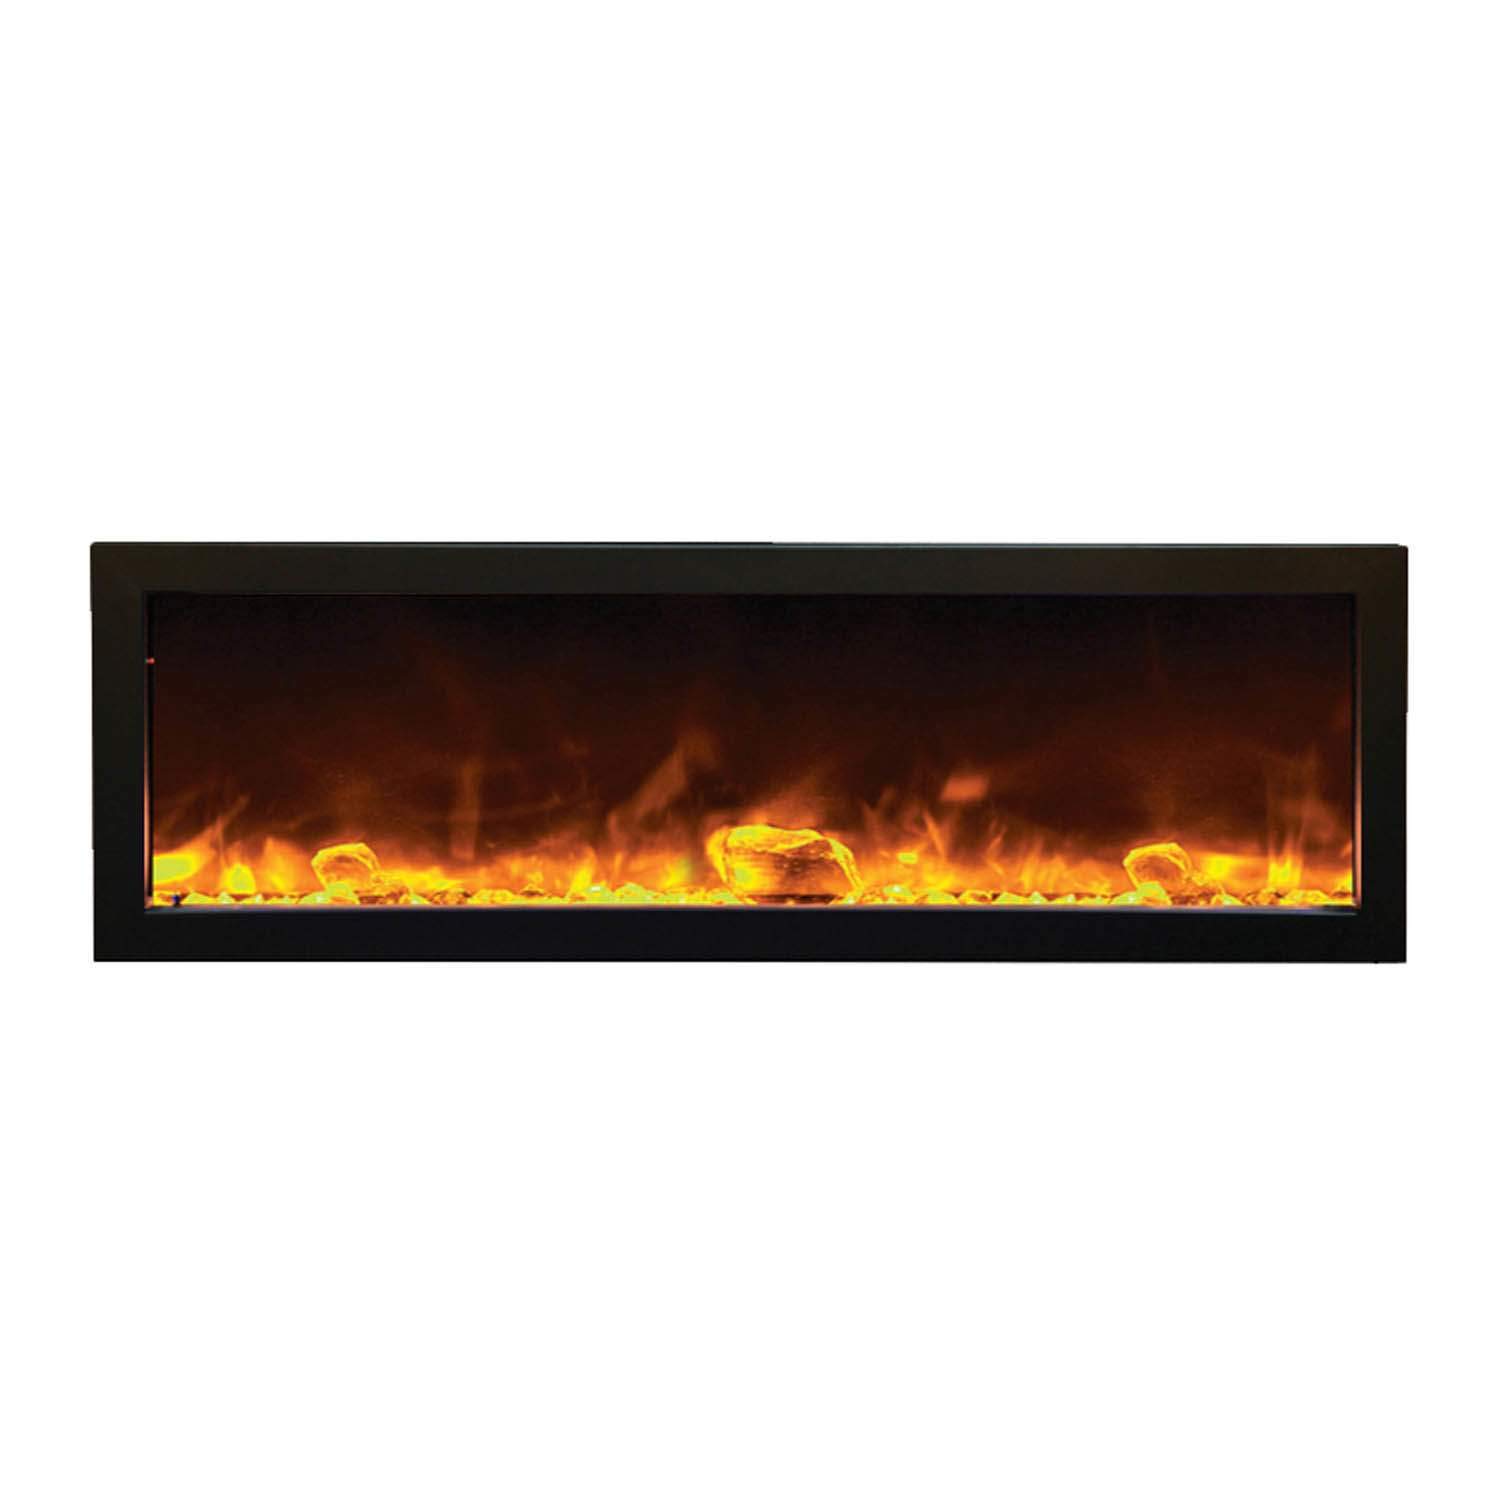 Fireplace Tv Stand Lowes Fresh 19 Awesome 50 Inch Recessed Electric Fireplace